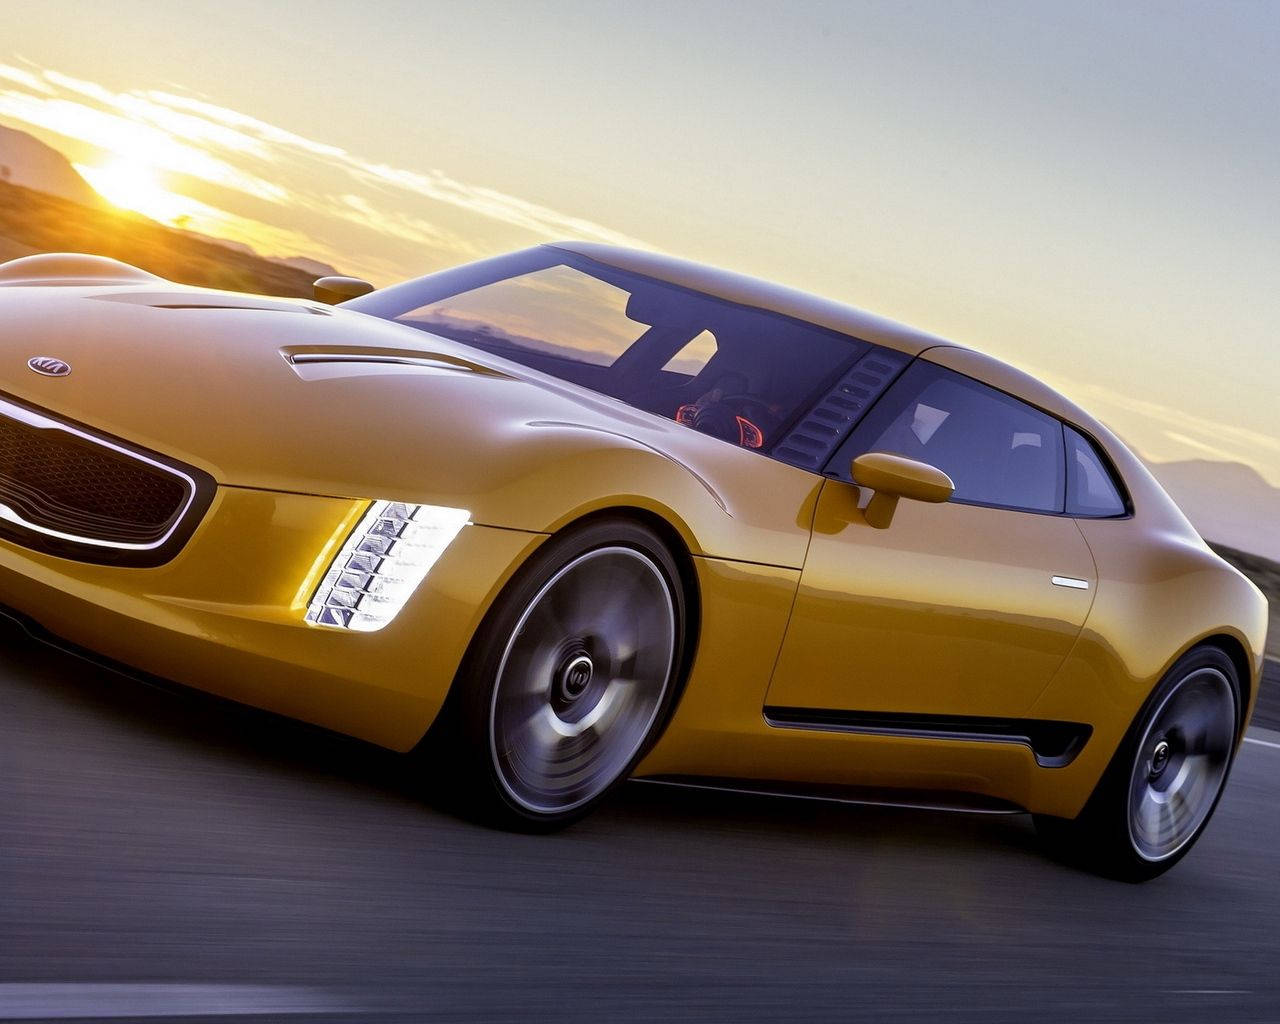 The Kia Gt4 Stinger Concept: A Stunning Sports Car, Brimming With Style And Performance Wallpaper